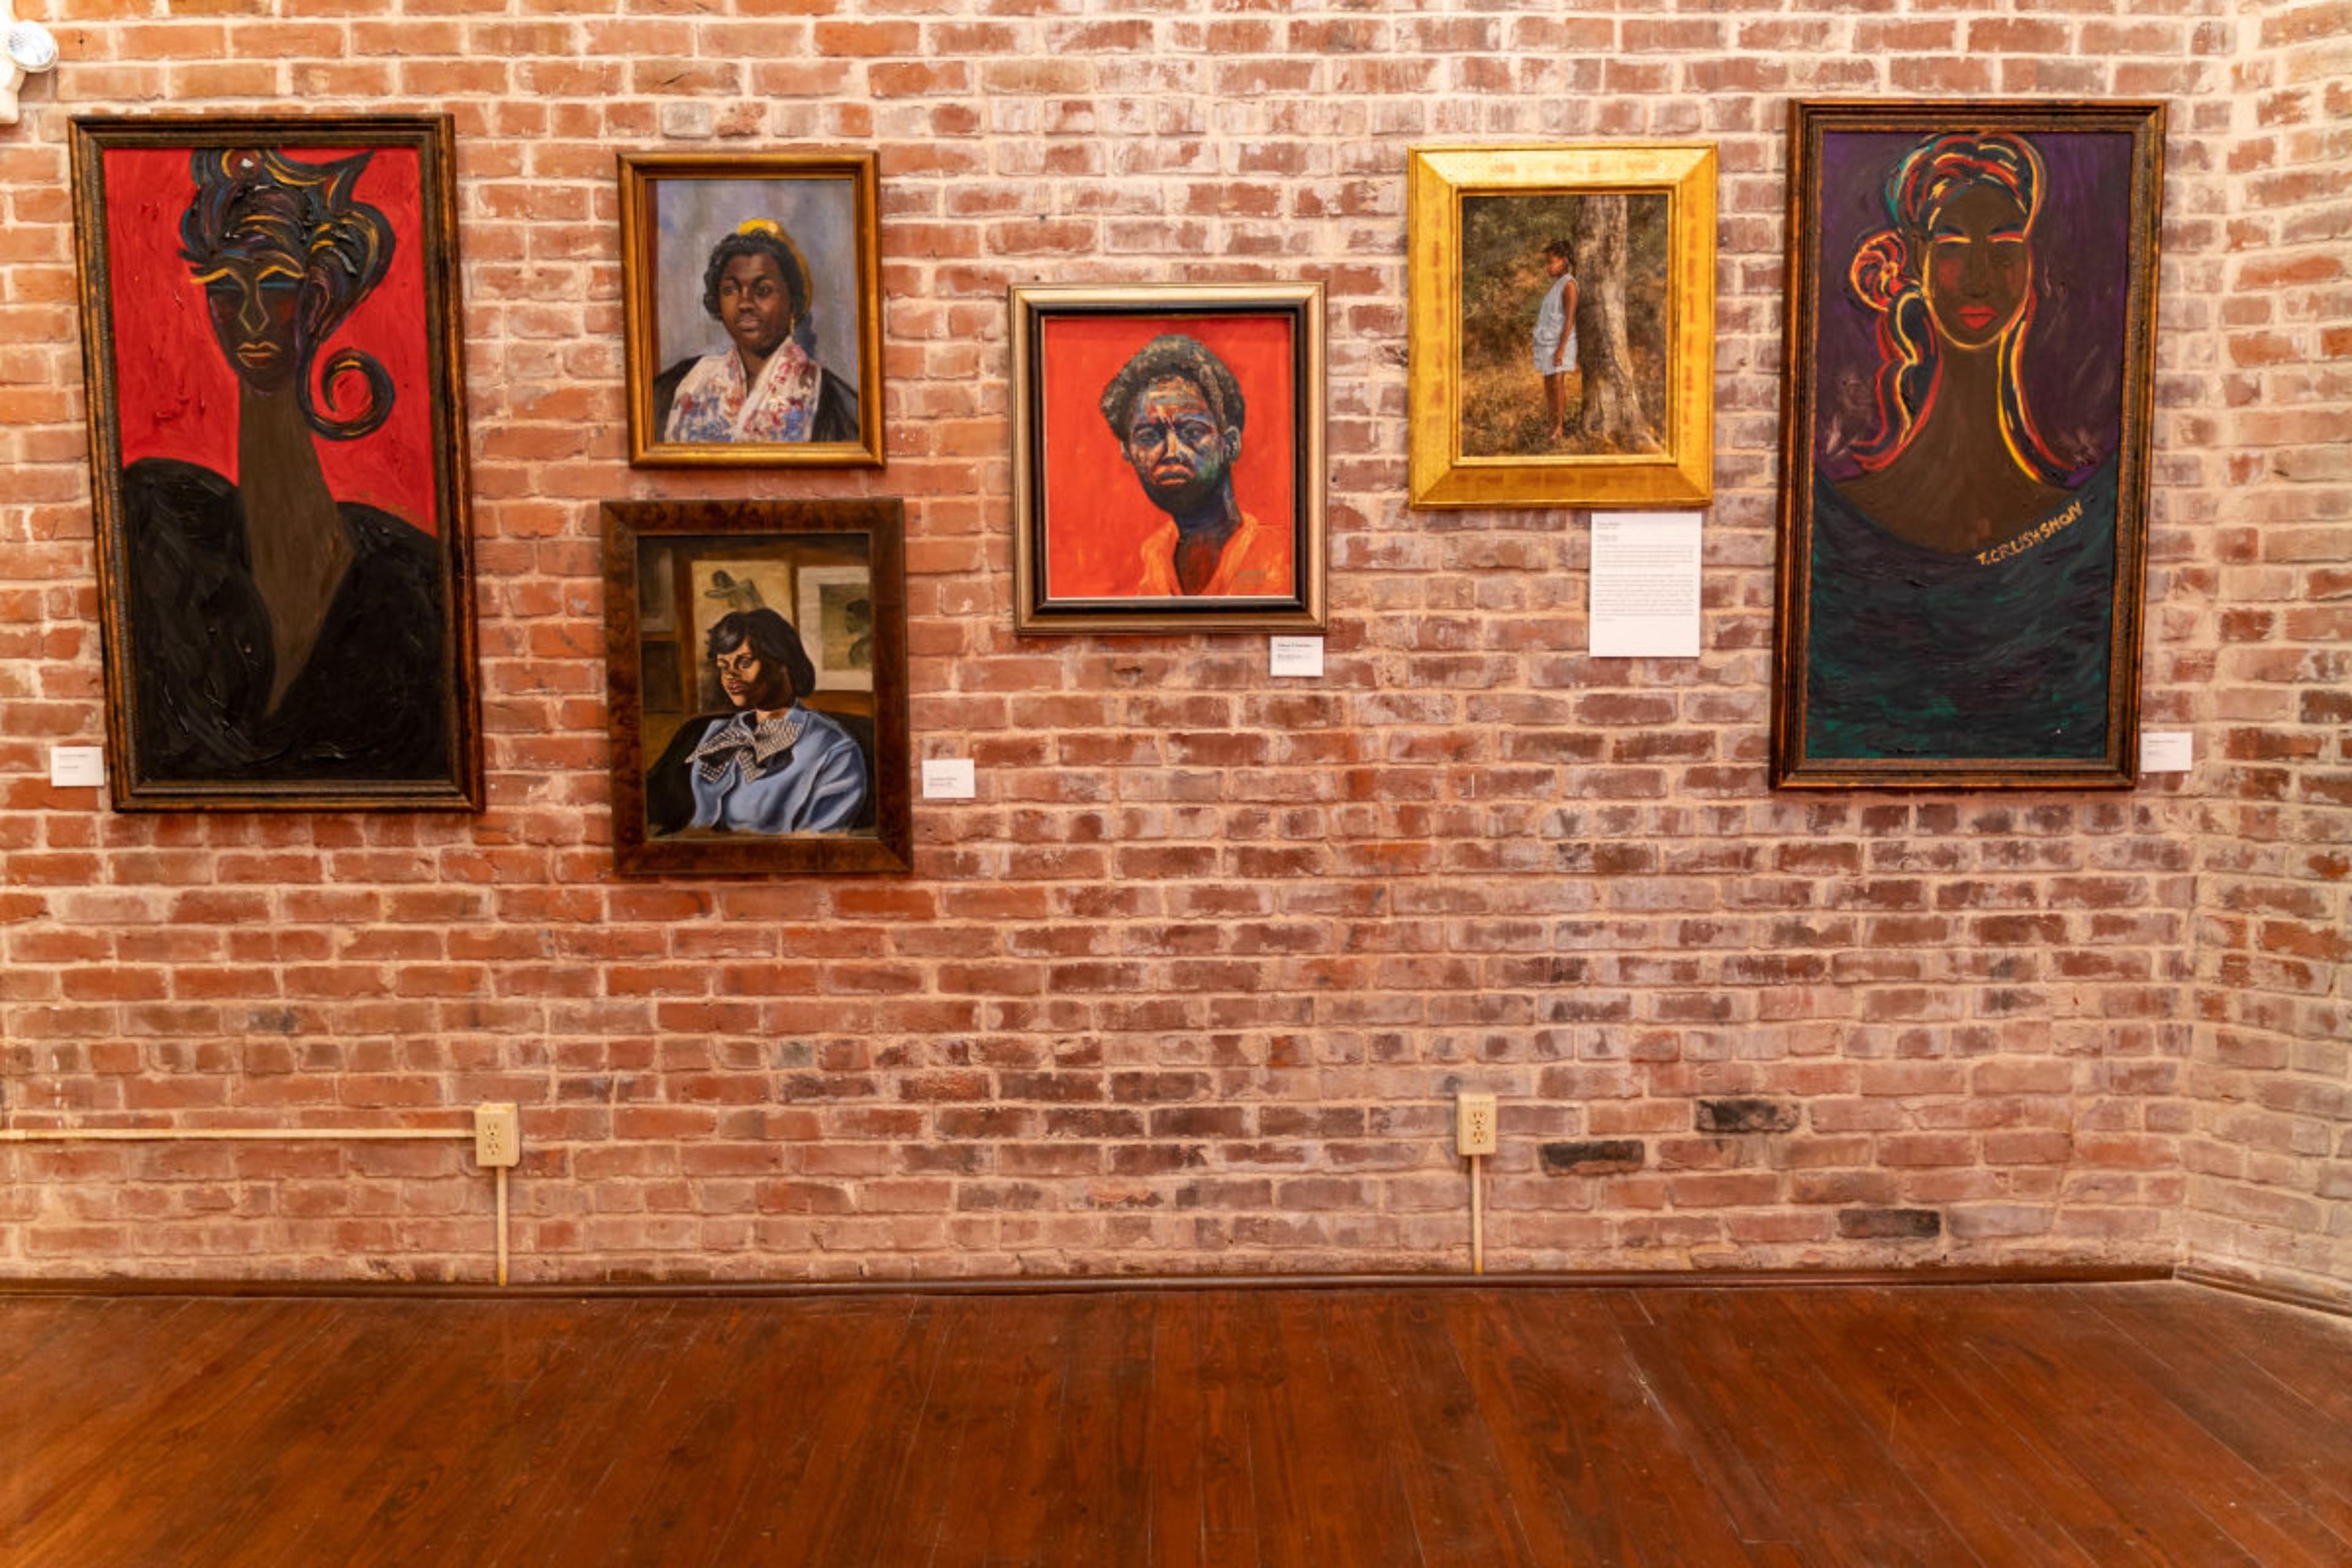 The George & Leah McKenna Museum of African American Art